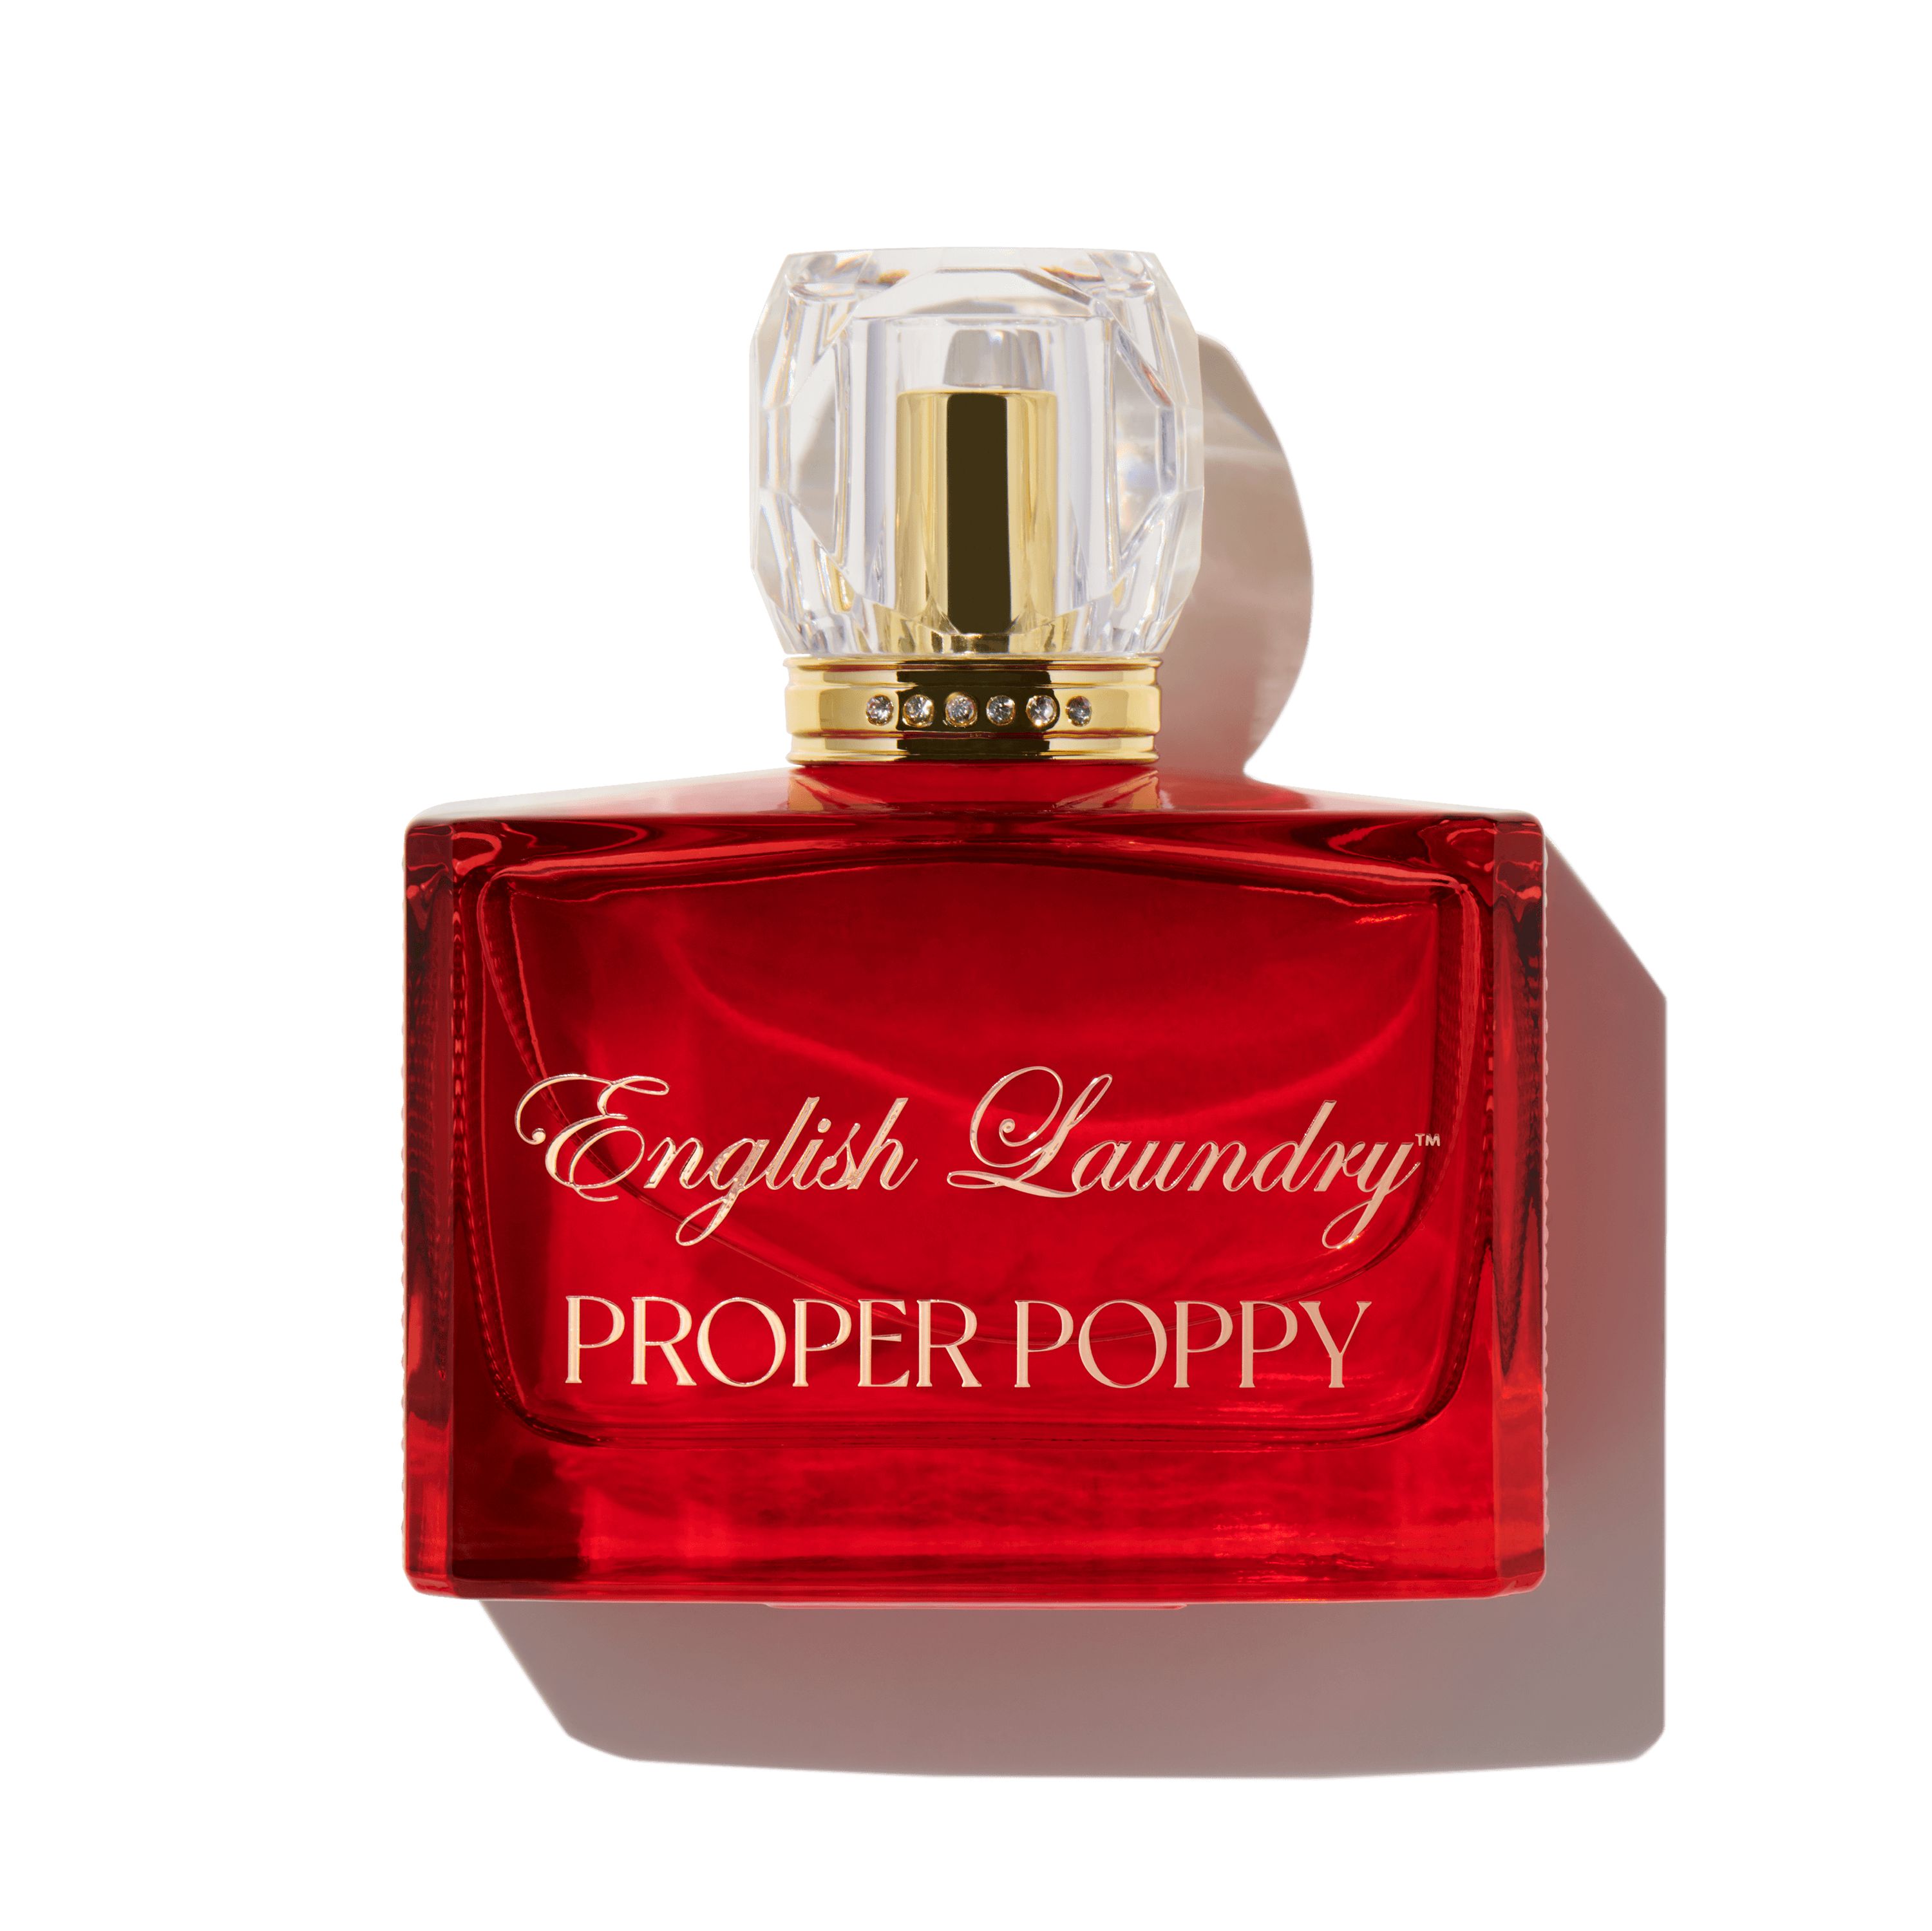 30 best perfume for women - new and cult classic fragrances